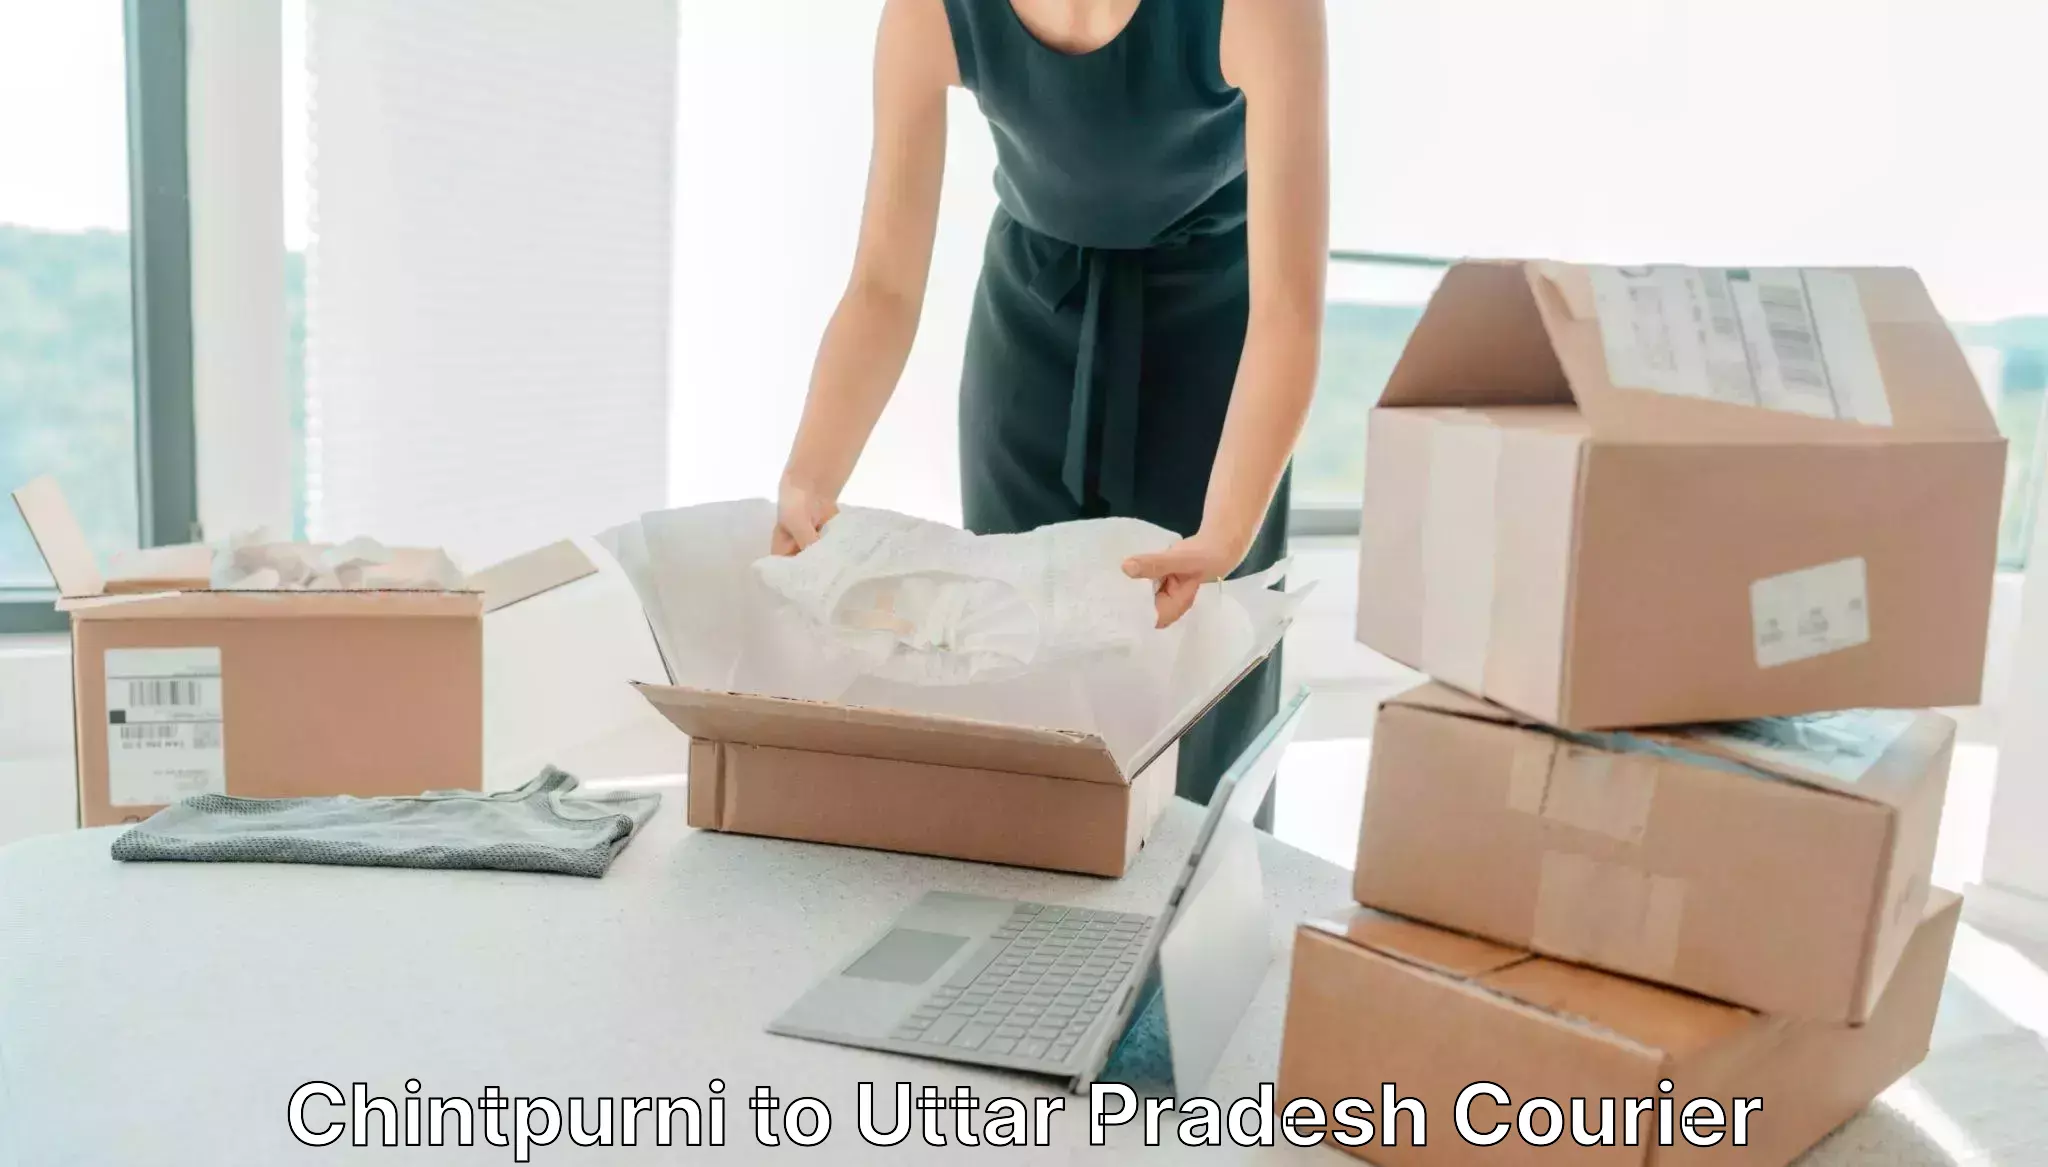 Modern delivery methods Chintpurni to Noida